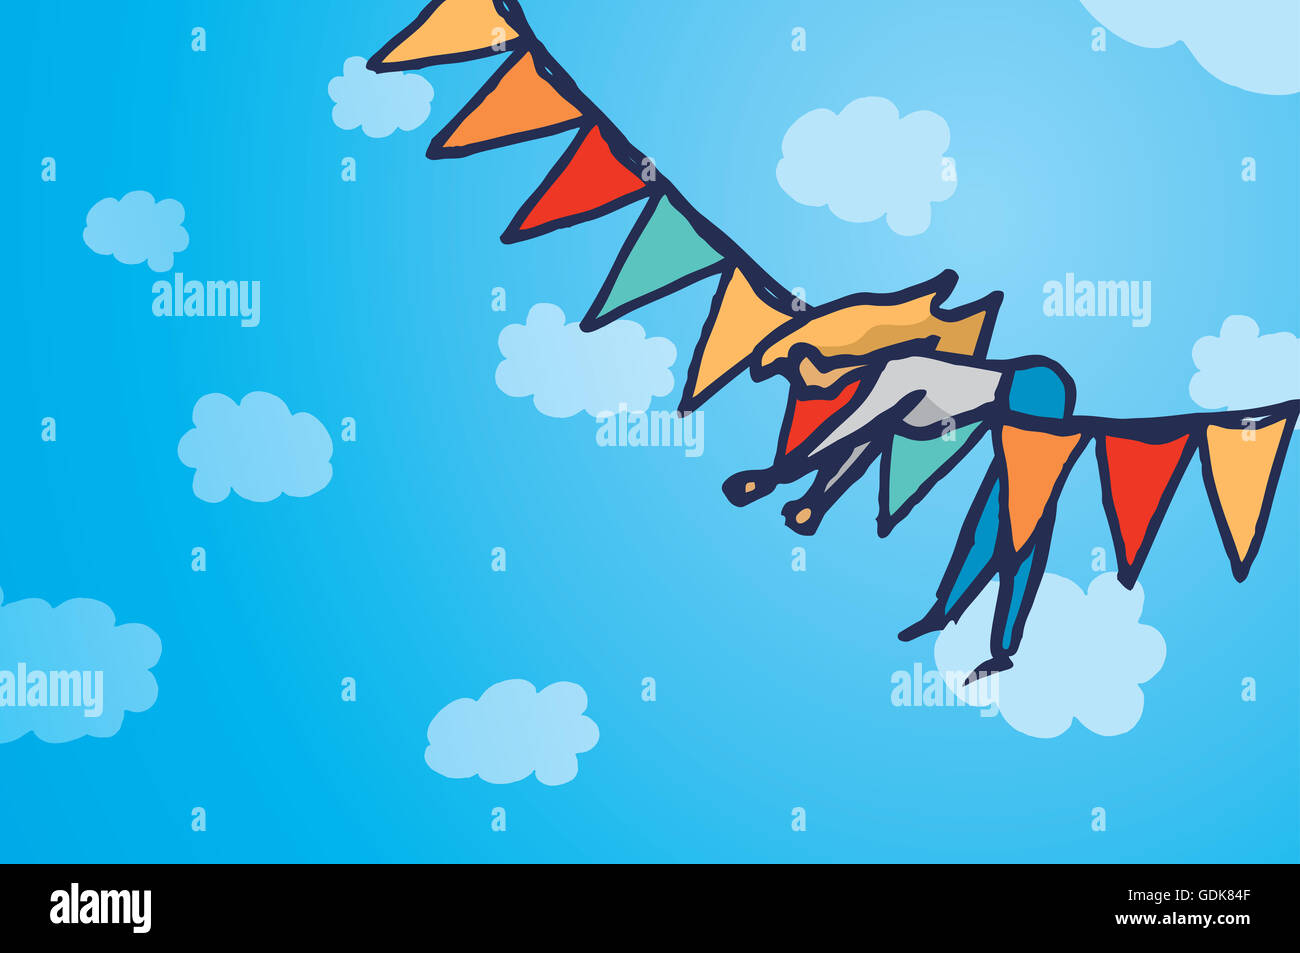 Cartoon illustration background of a woman hanging up over colorful party pennants Stock Photo